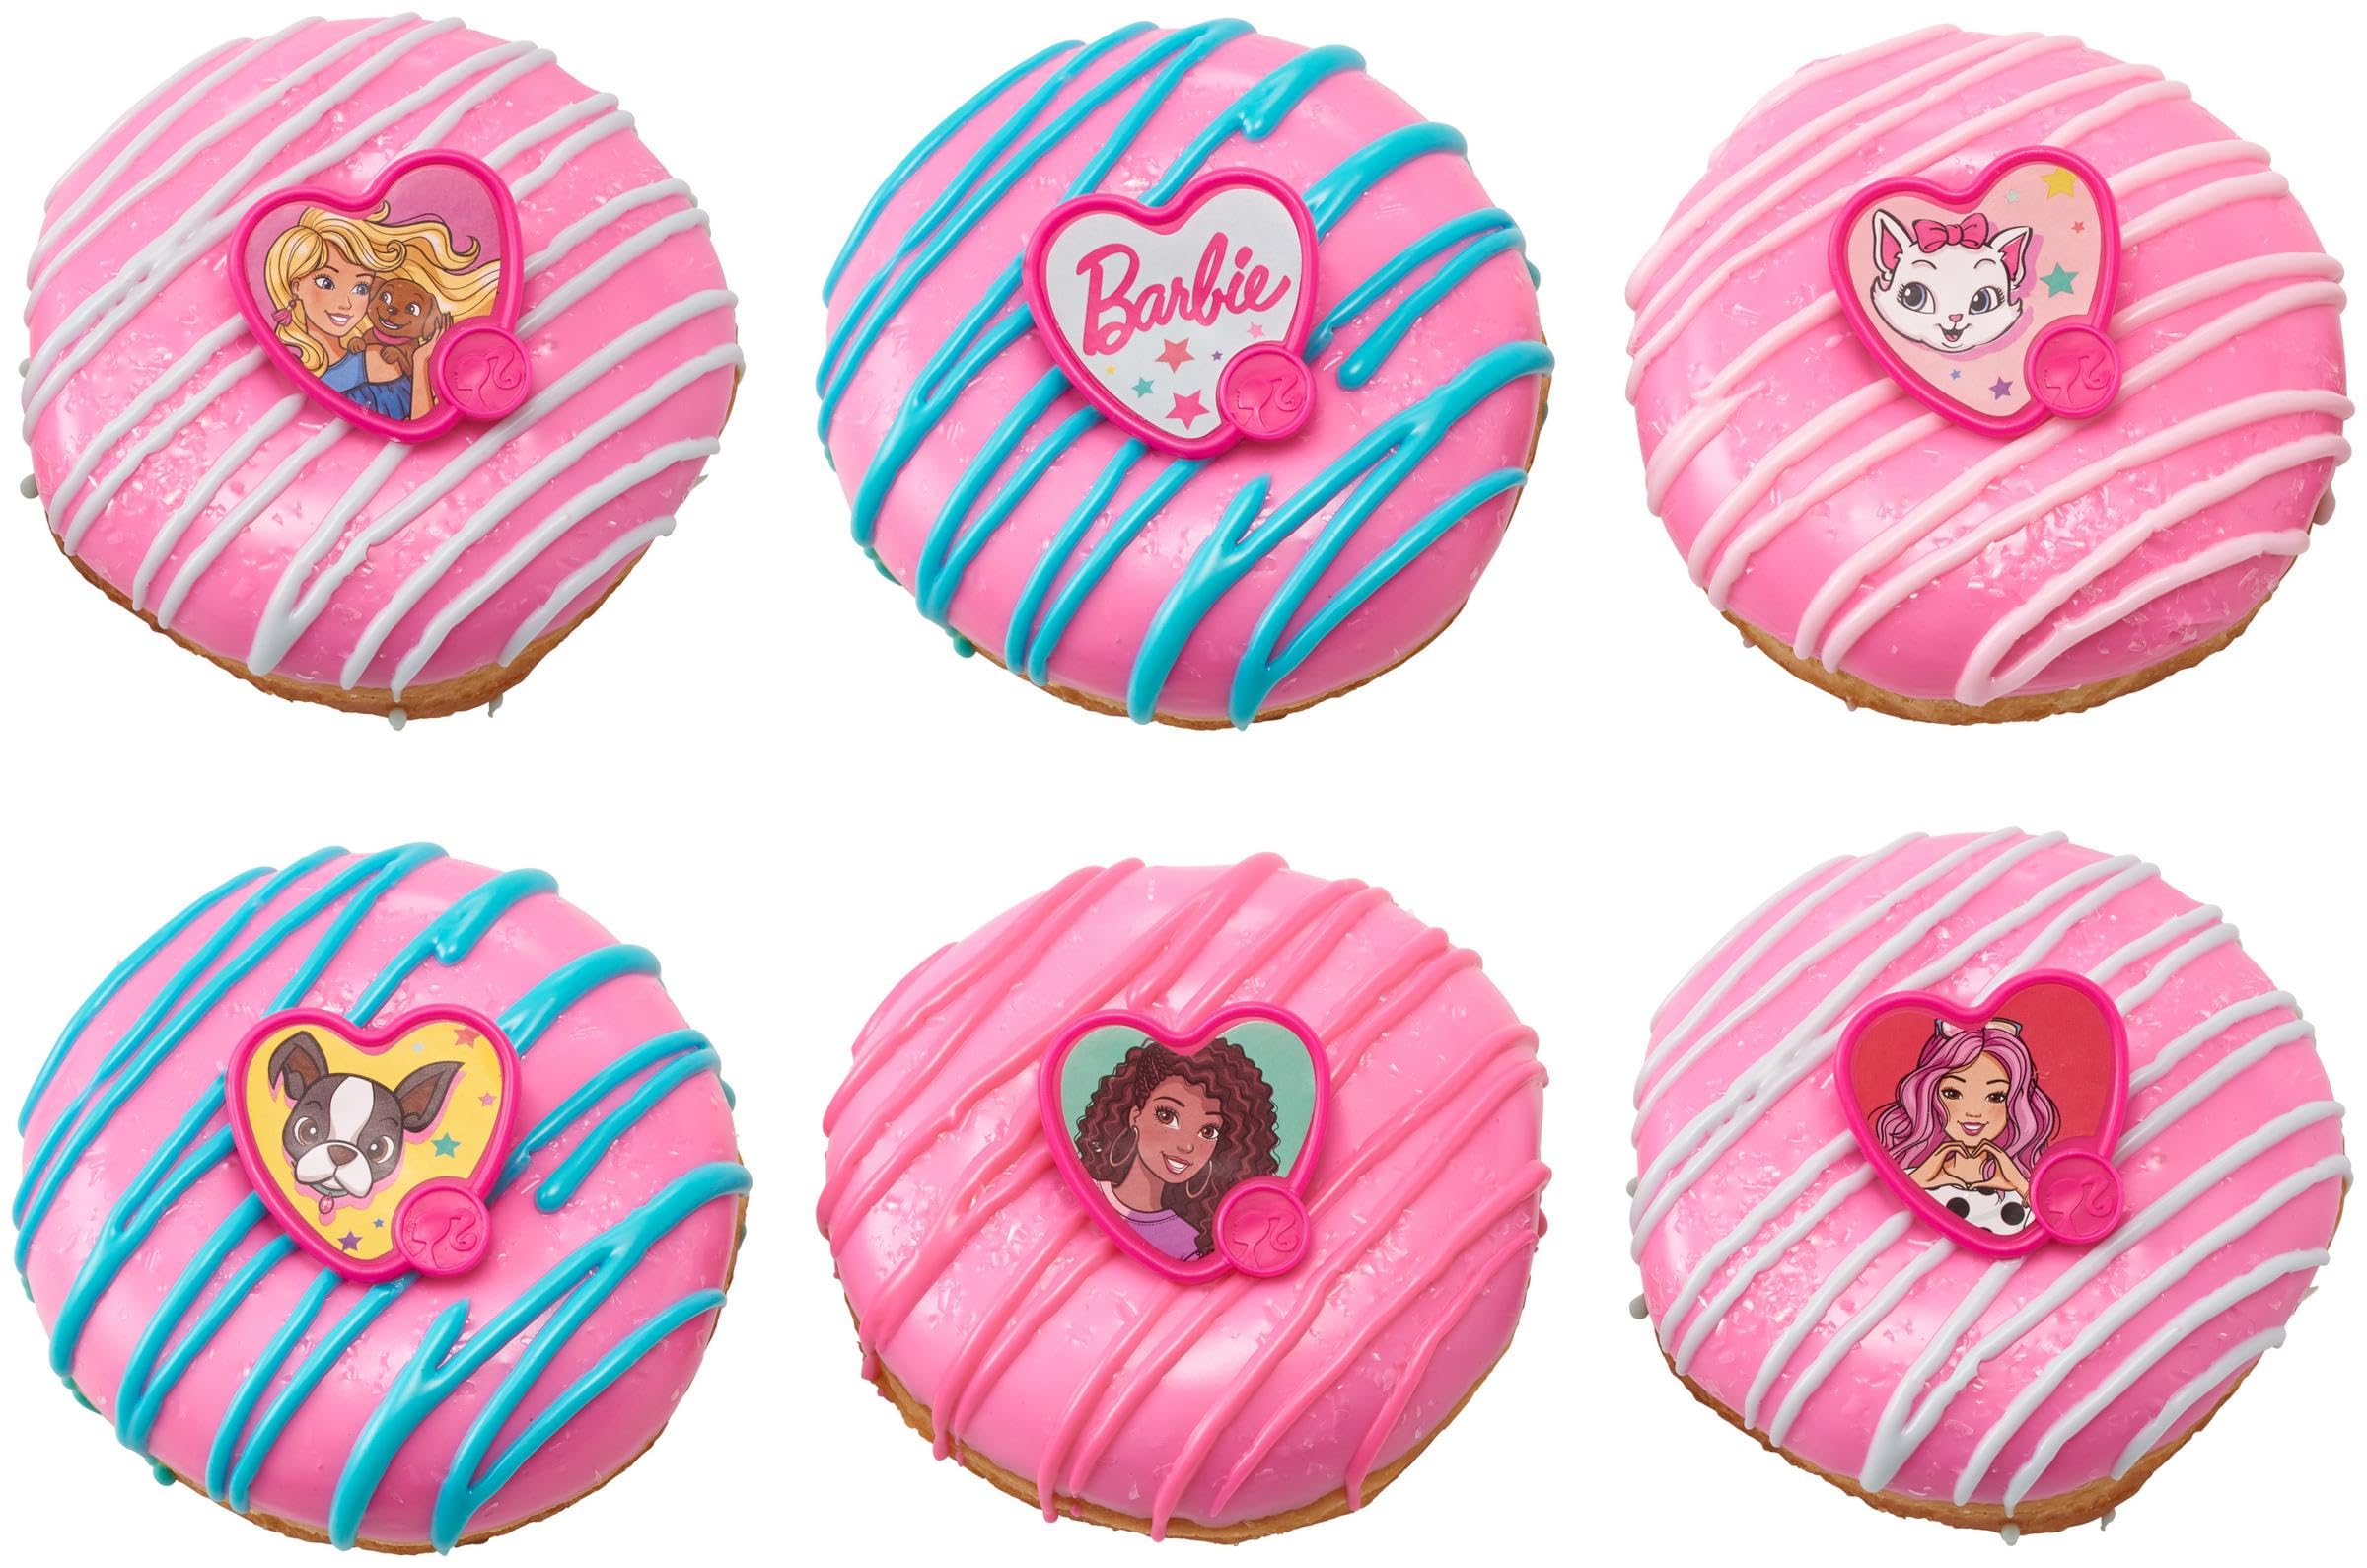 DecoPac Barbie™ Be The Future Rings, Pink Heart Shaped Cupcake Decorations Featuring Barbie and her Friends For Birthday Party And Celebrations - 24 Pack